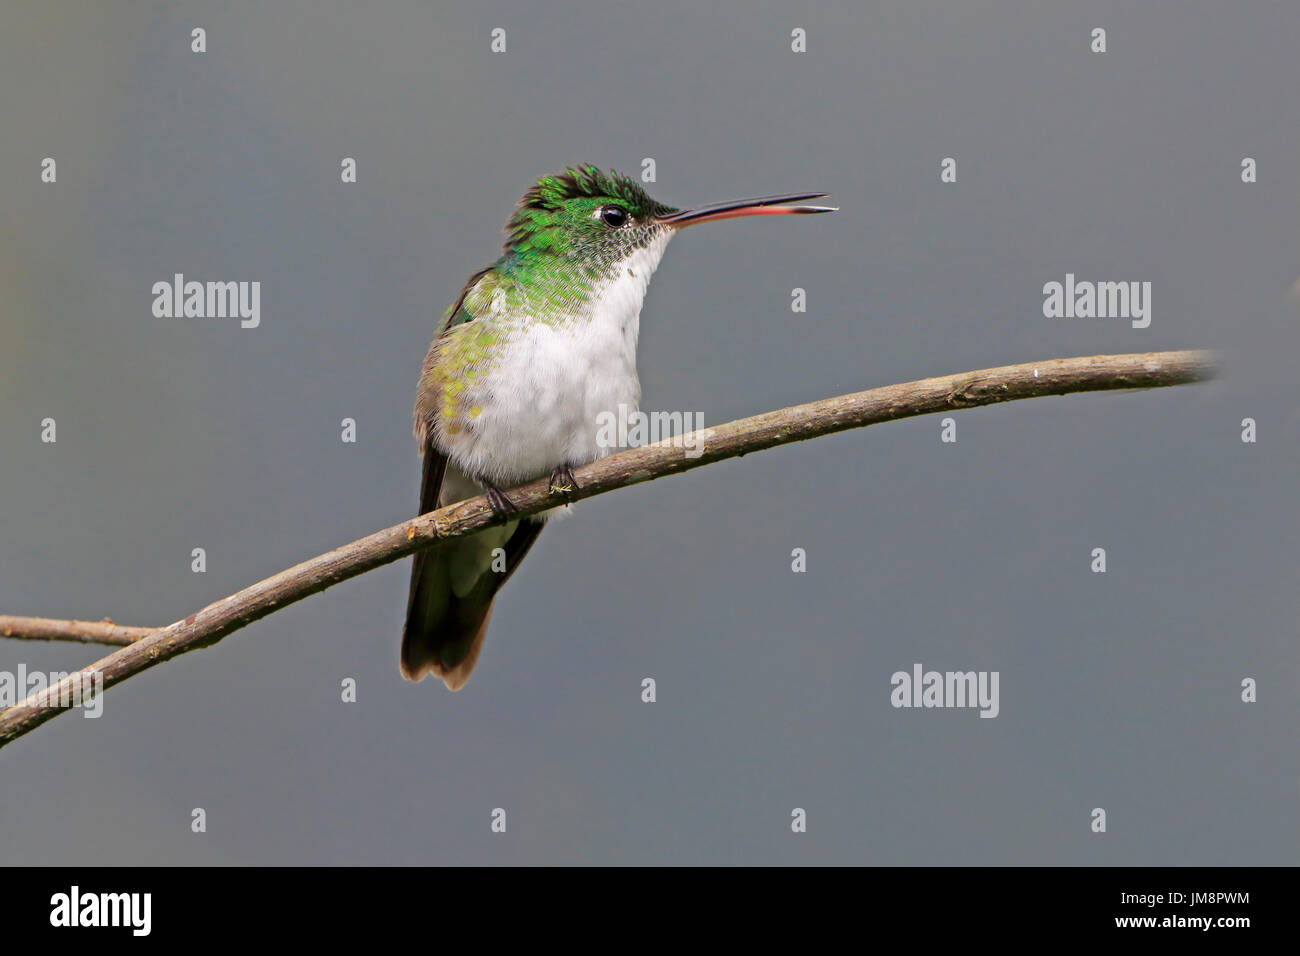 Andean Emerald Hummingbird perched in the cloud Forest in Ecuador Stock Photo